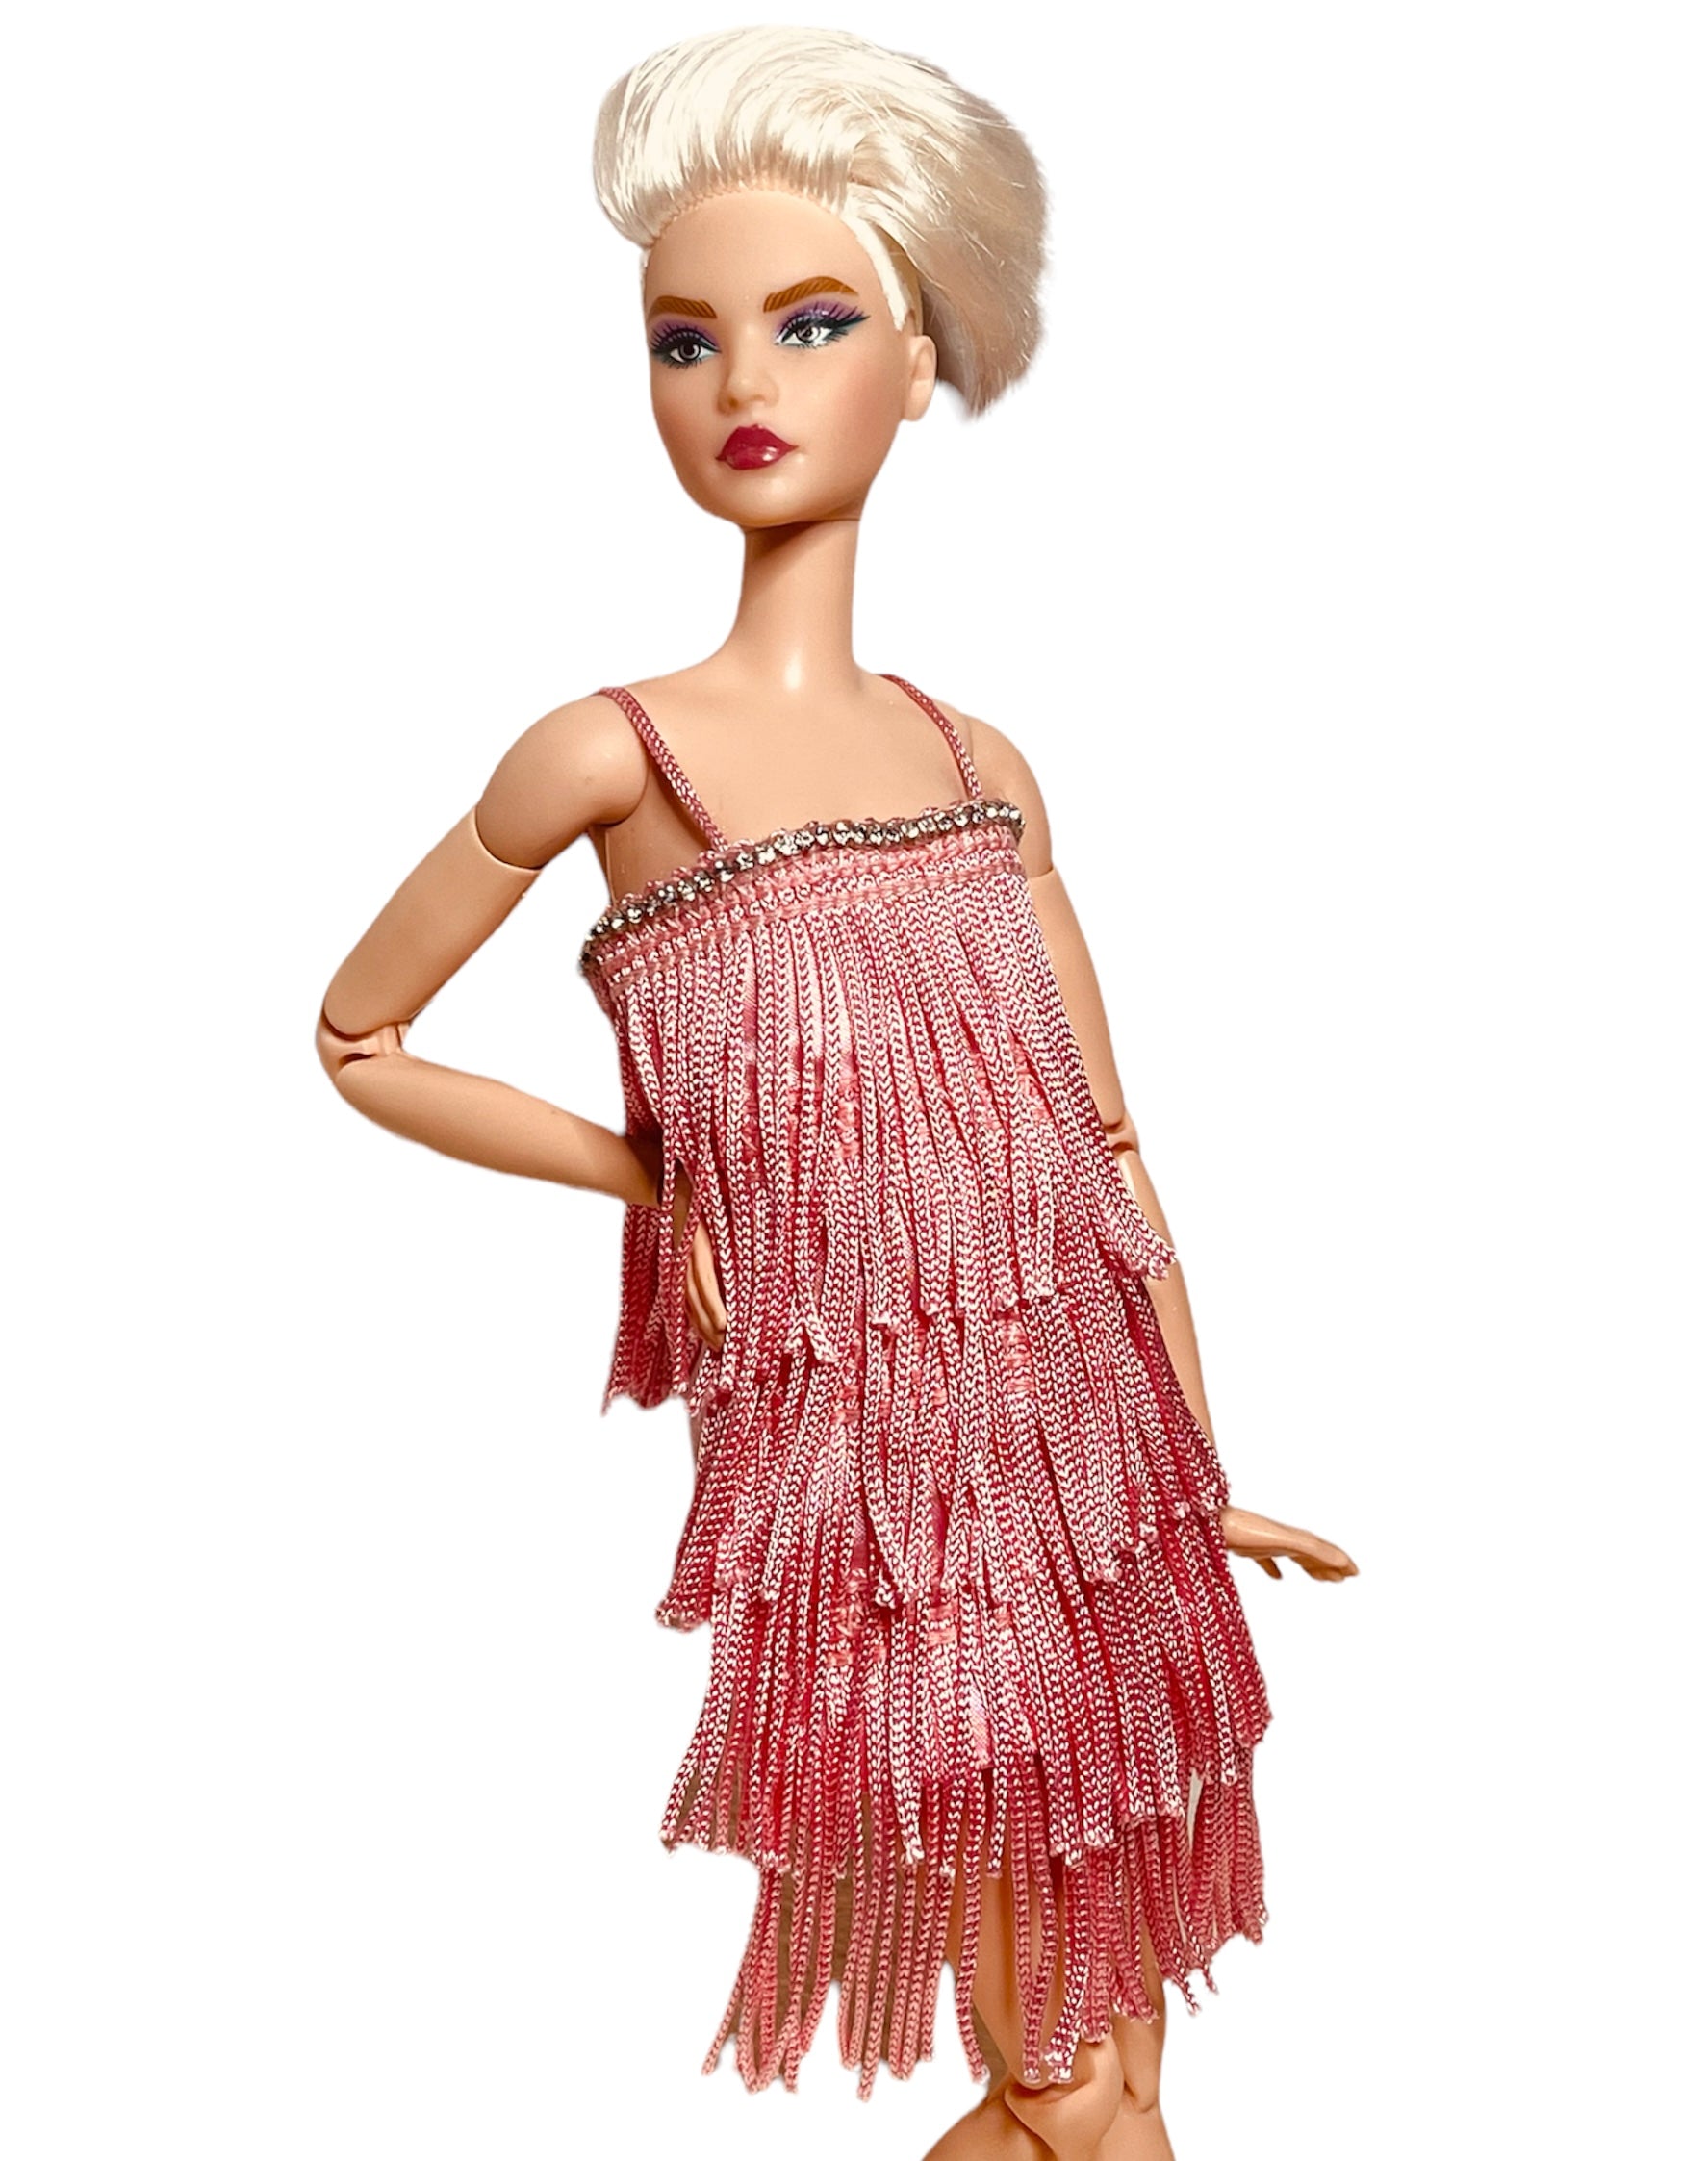 Pink suit for Barbie doll – The Doll Tailor